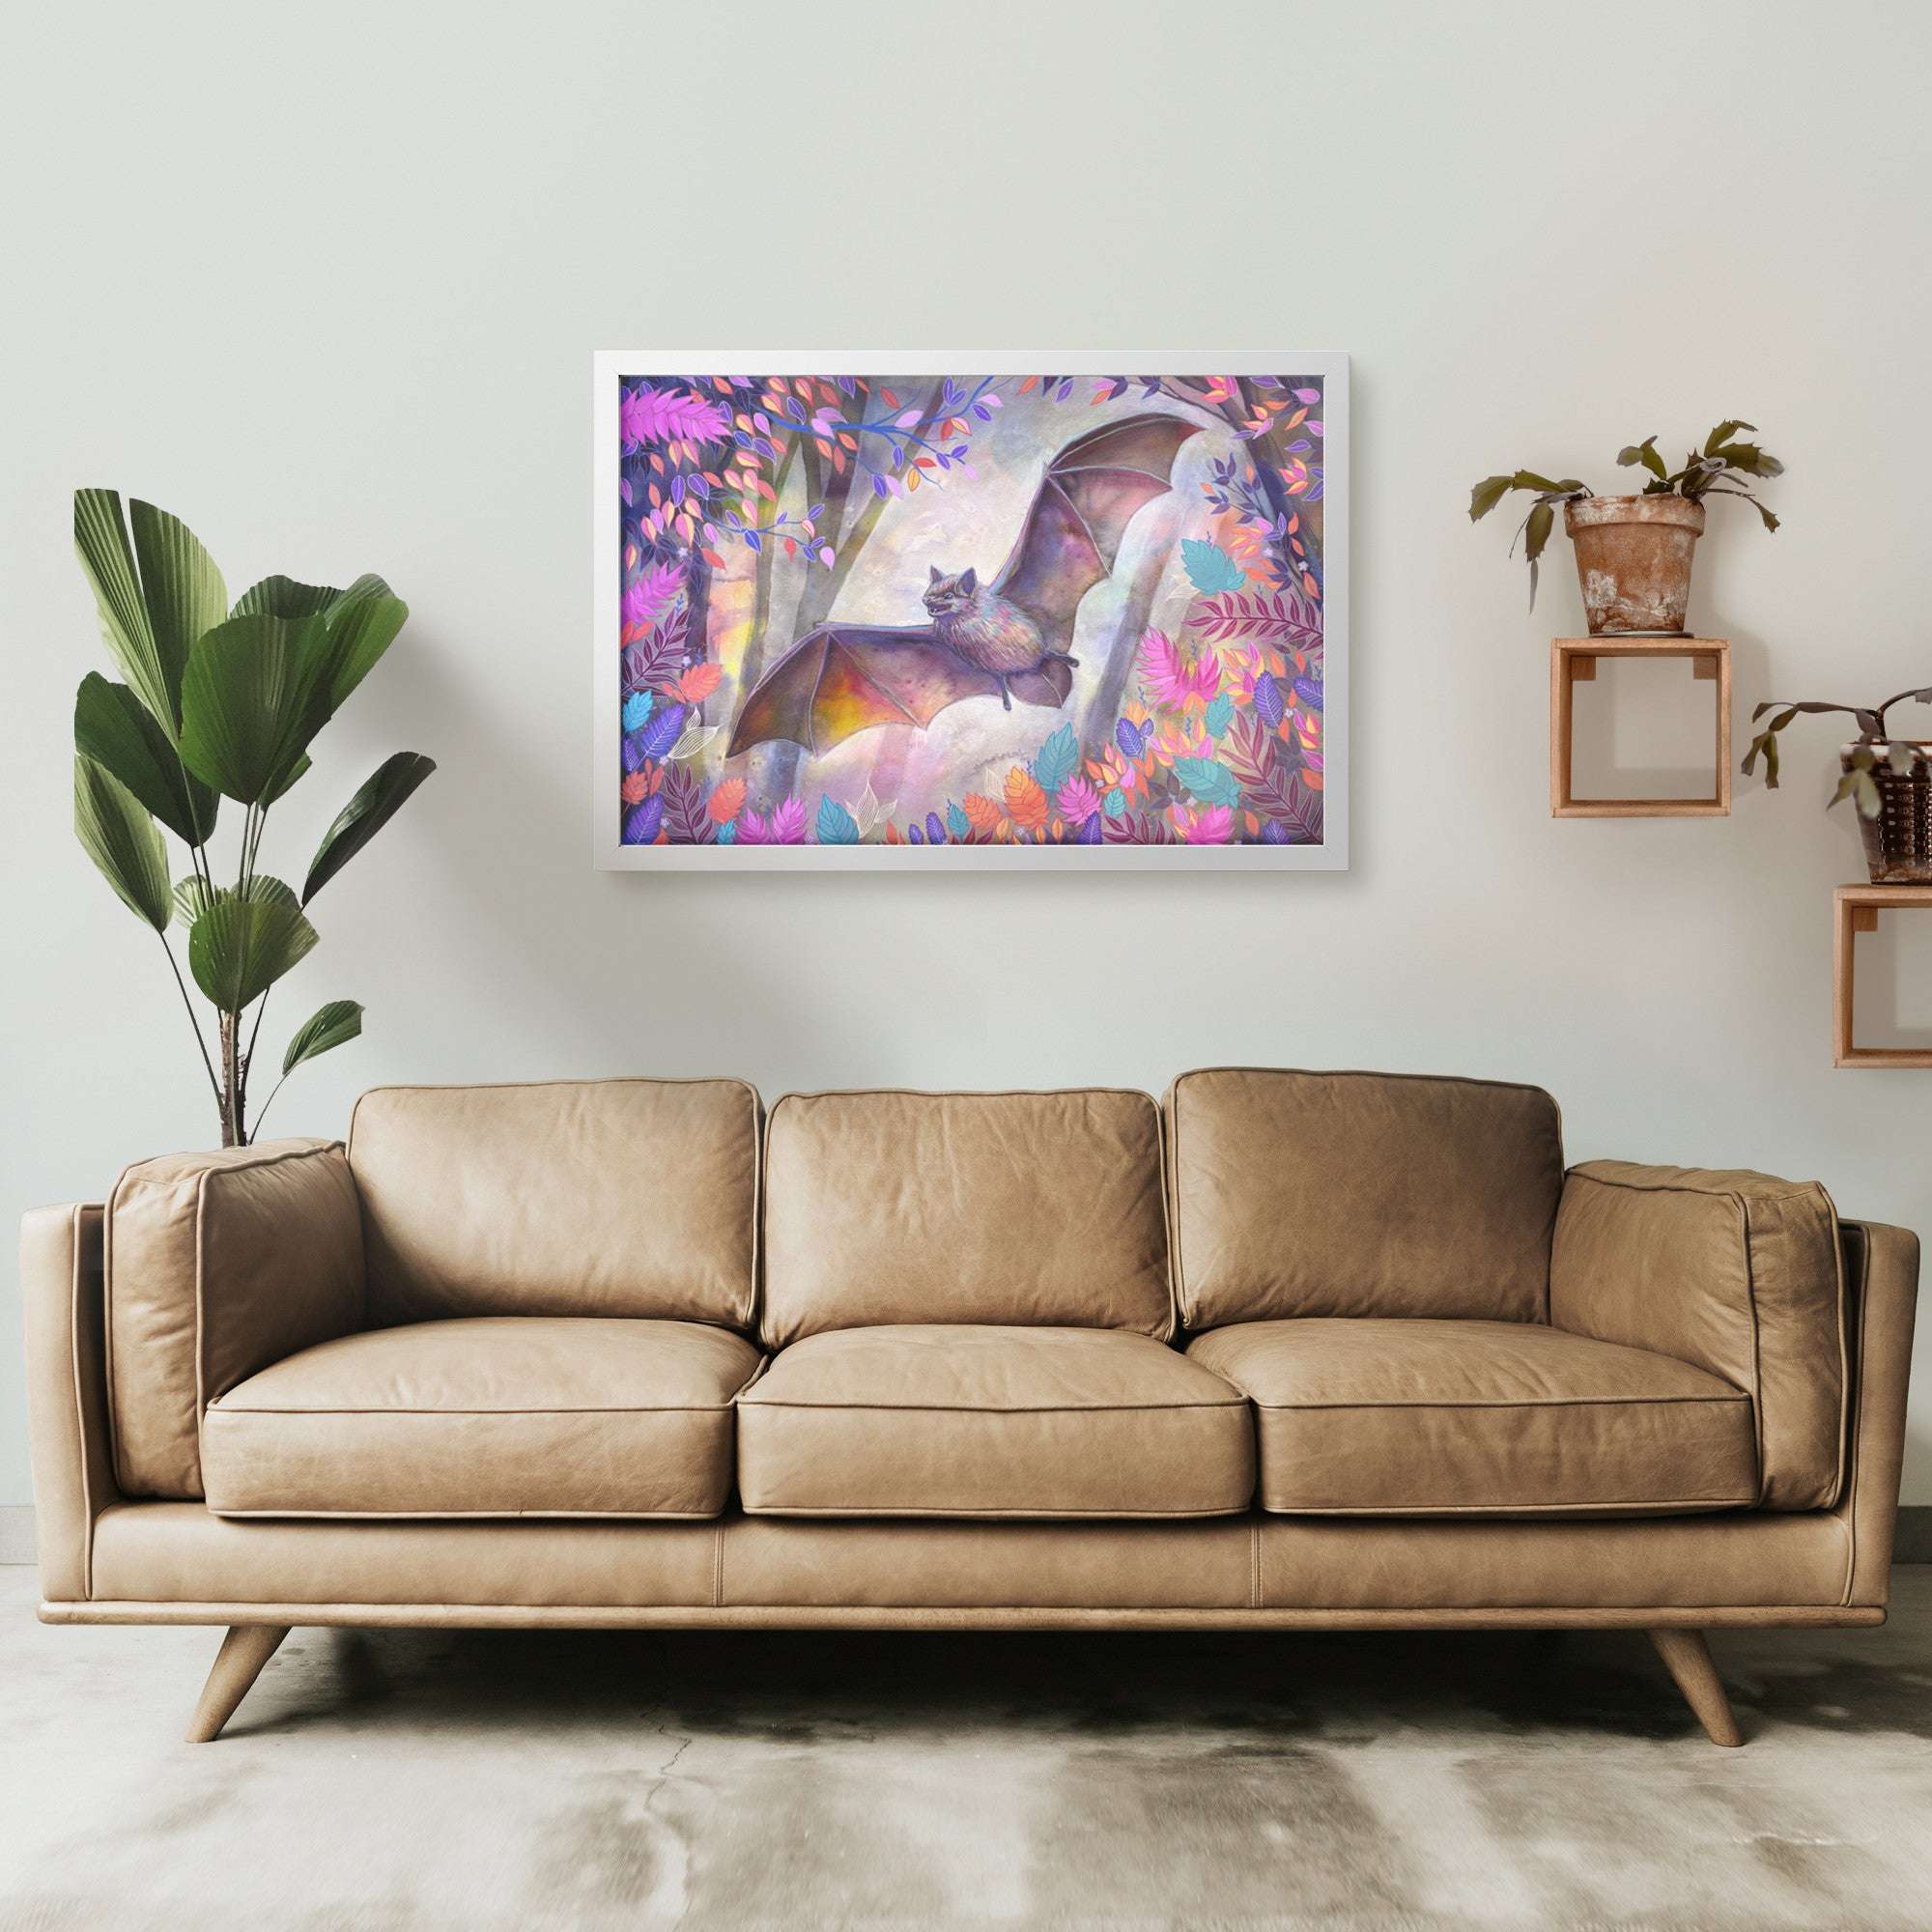 A modern living room with a large beige sofa centered under a Framed Bat Print of a colorful bat painting.